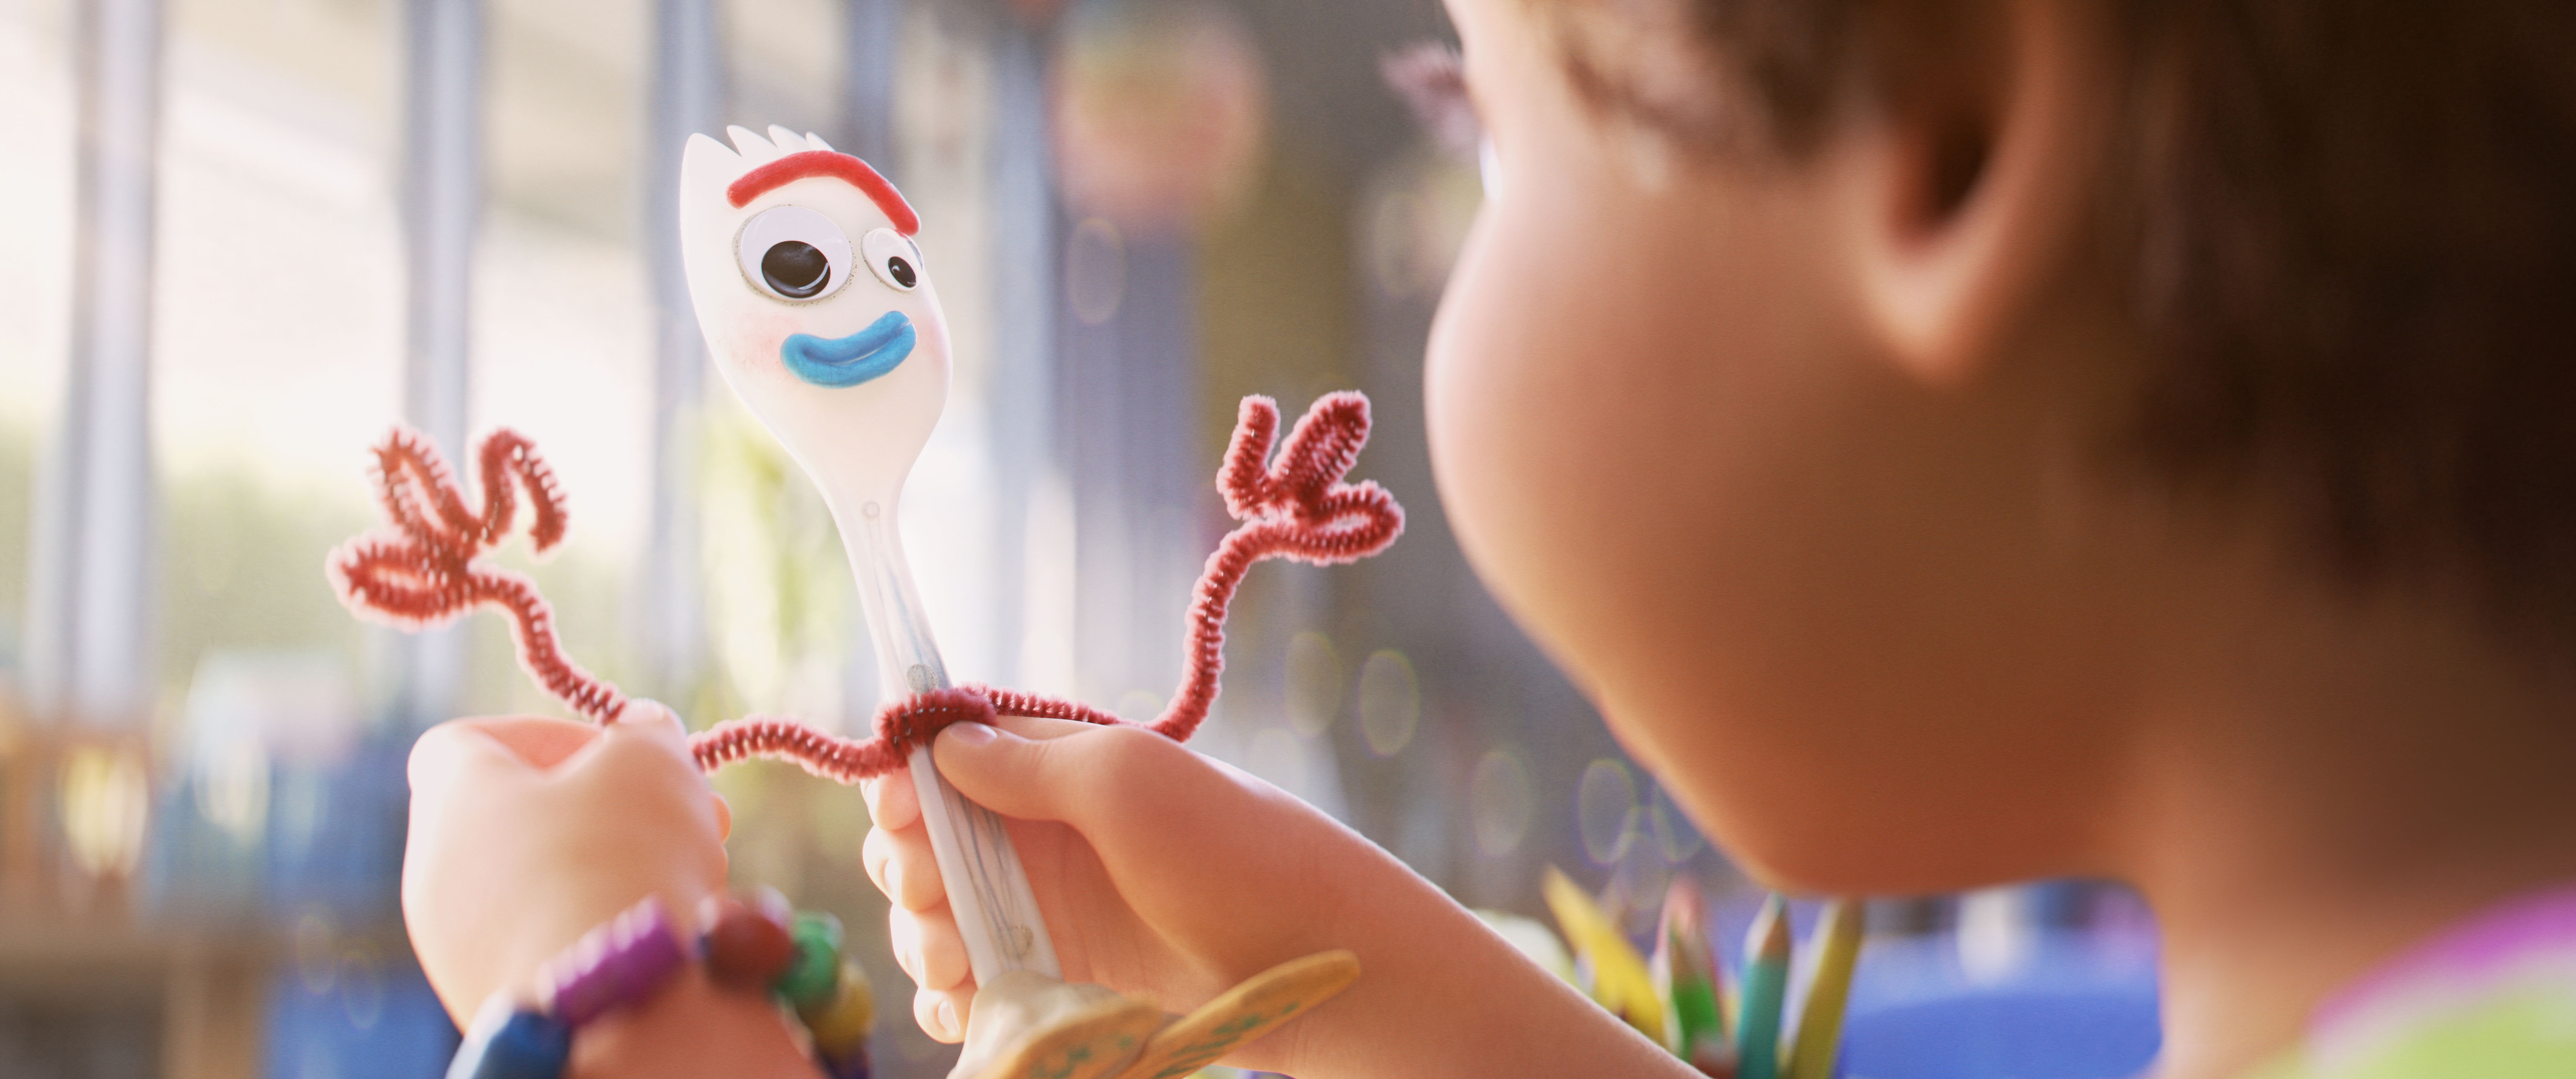 Forky in Toy Story 4